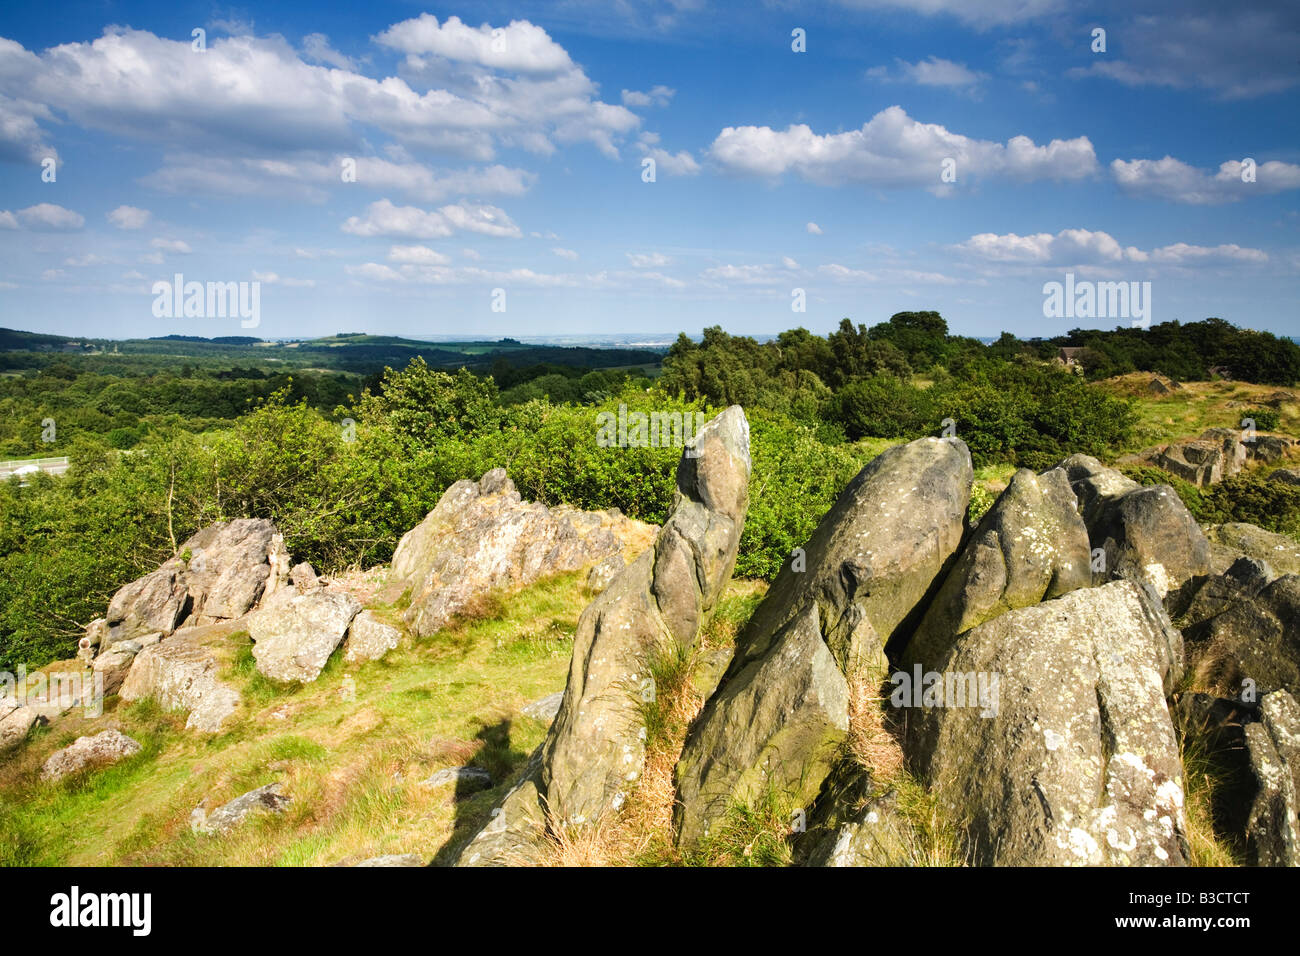 Altar stones a high point in Leicestershire Stock Photo